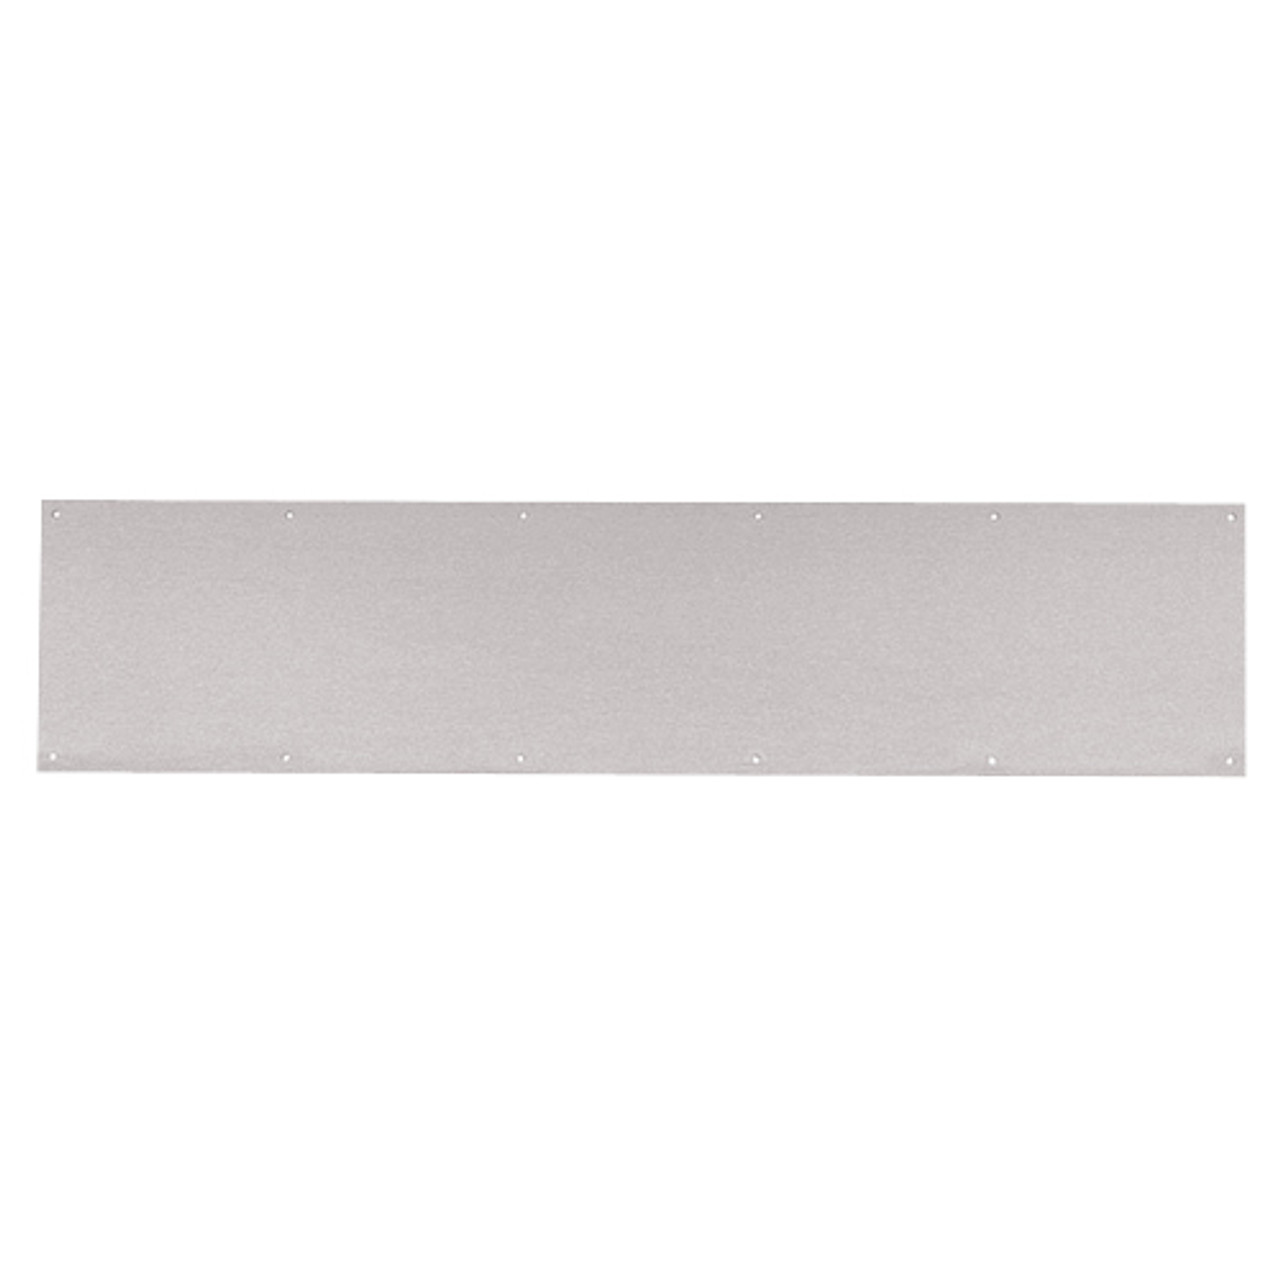 8400-US32D-40x34-B-CS Ives 8400 Series Protection Plate in Satin Stainless Steel